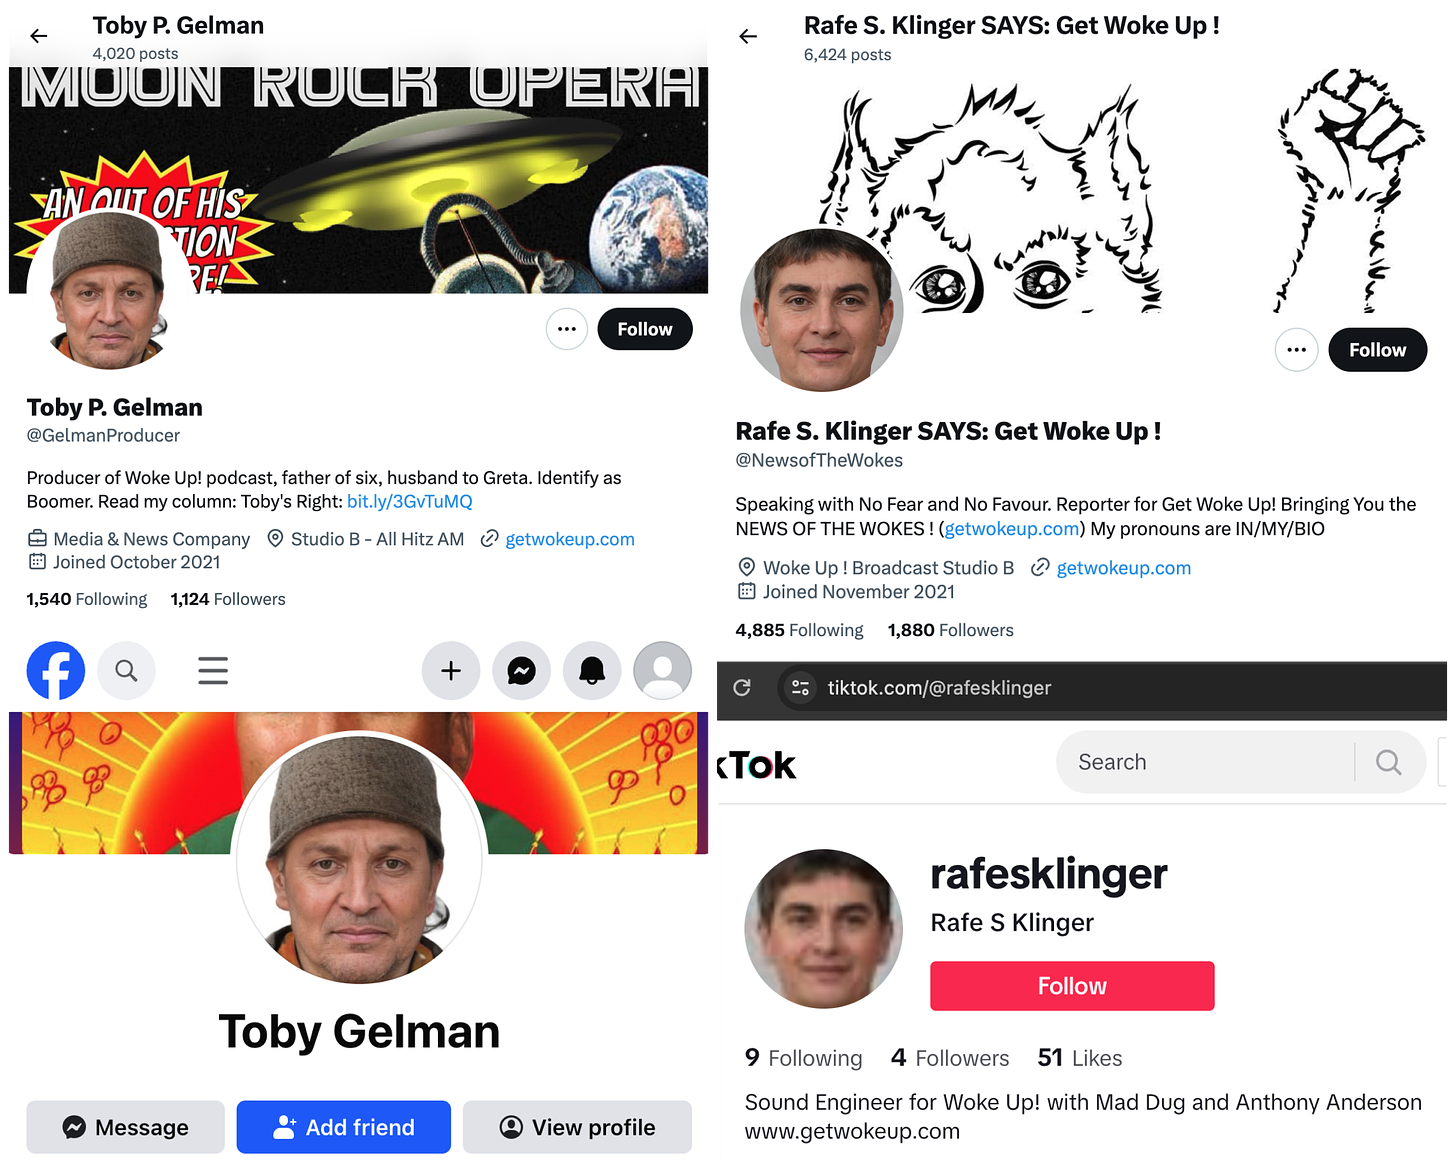 screenshots of the X and Facebook profiles for Toby P. Gelman and the X and Tiktok profiles for Rafe S. Klinger, which feature the same GAN-generated faces as the author pages on getwokeup.com